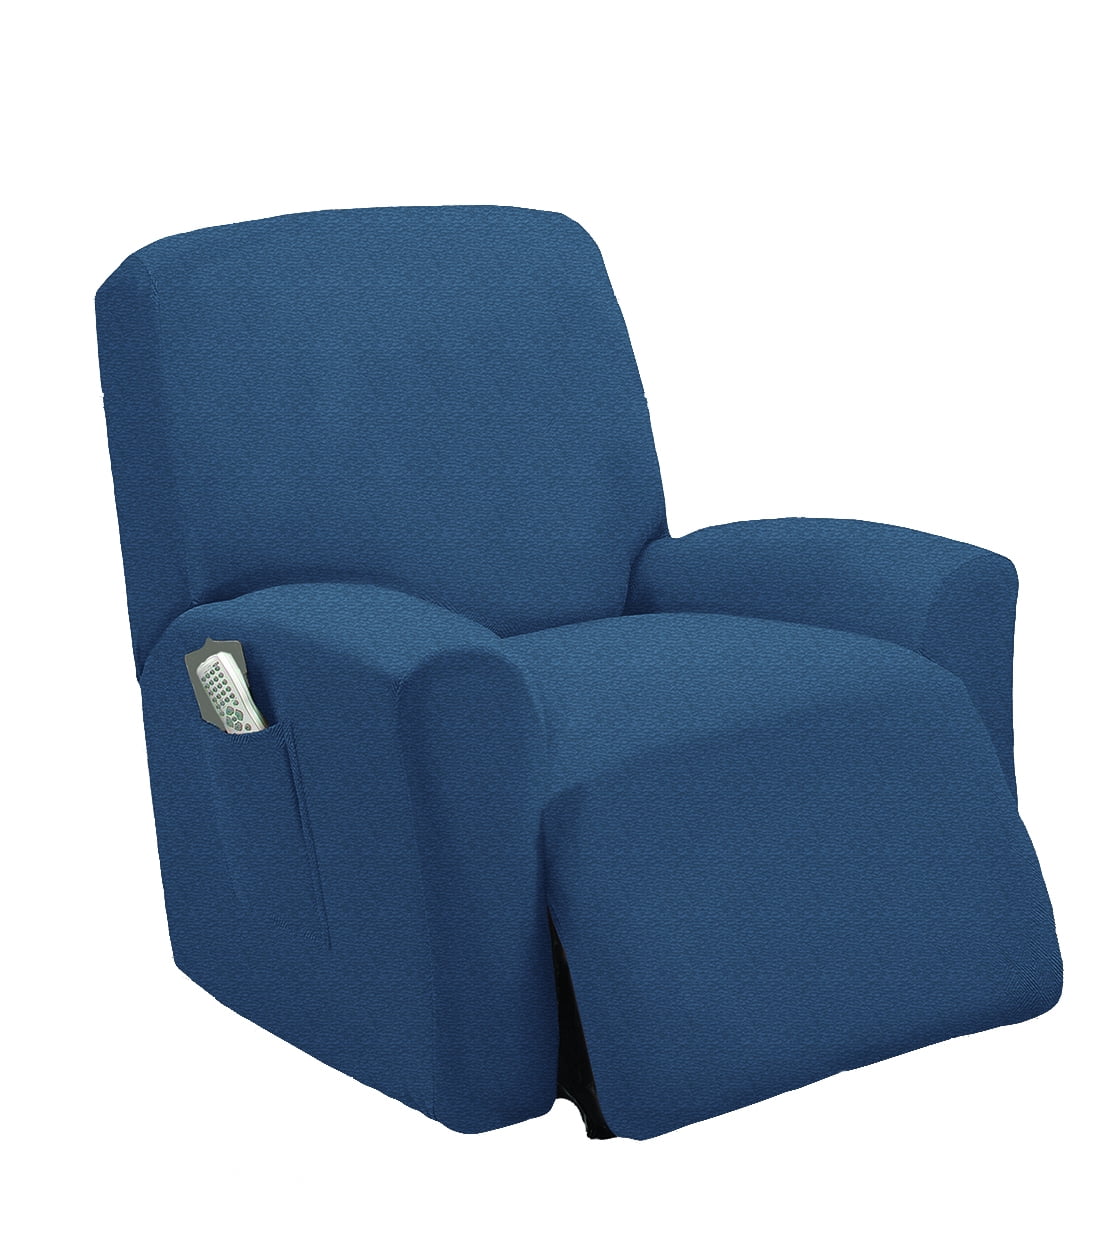 Details about   JERSEY PURPLE RECLINER COVER--LAZY BOY-AVAILABLE IN 9 SOLID COLORS & 3 PRINTS C 